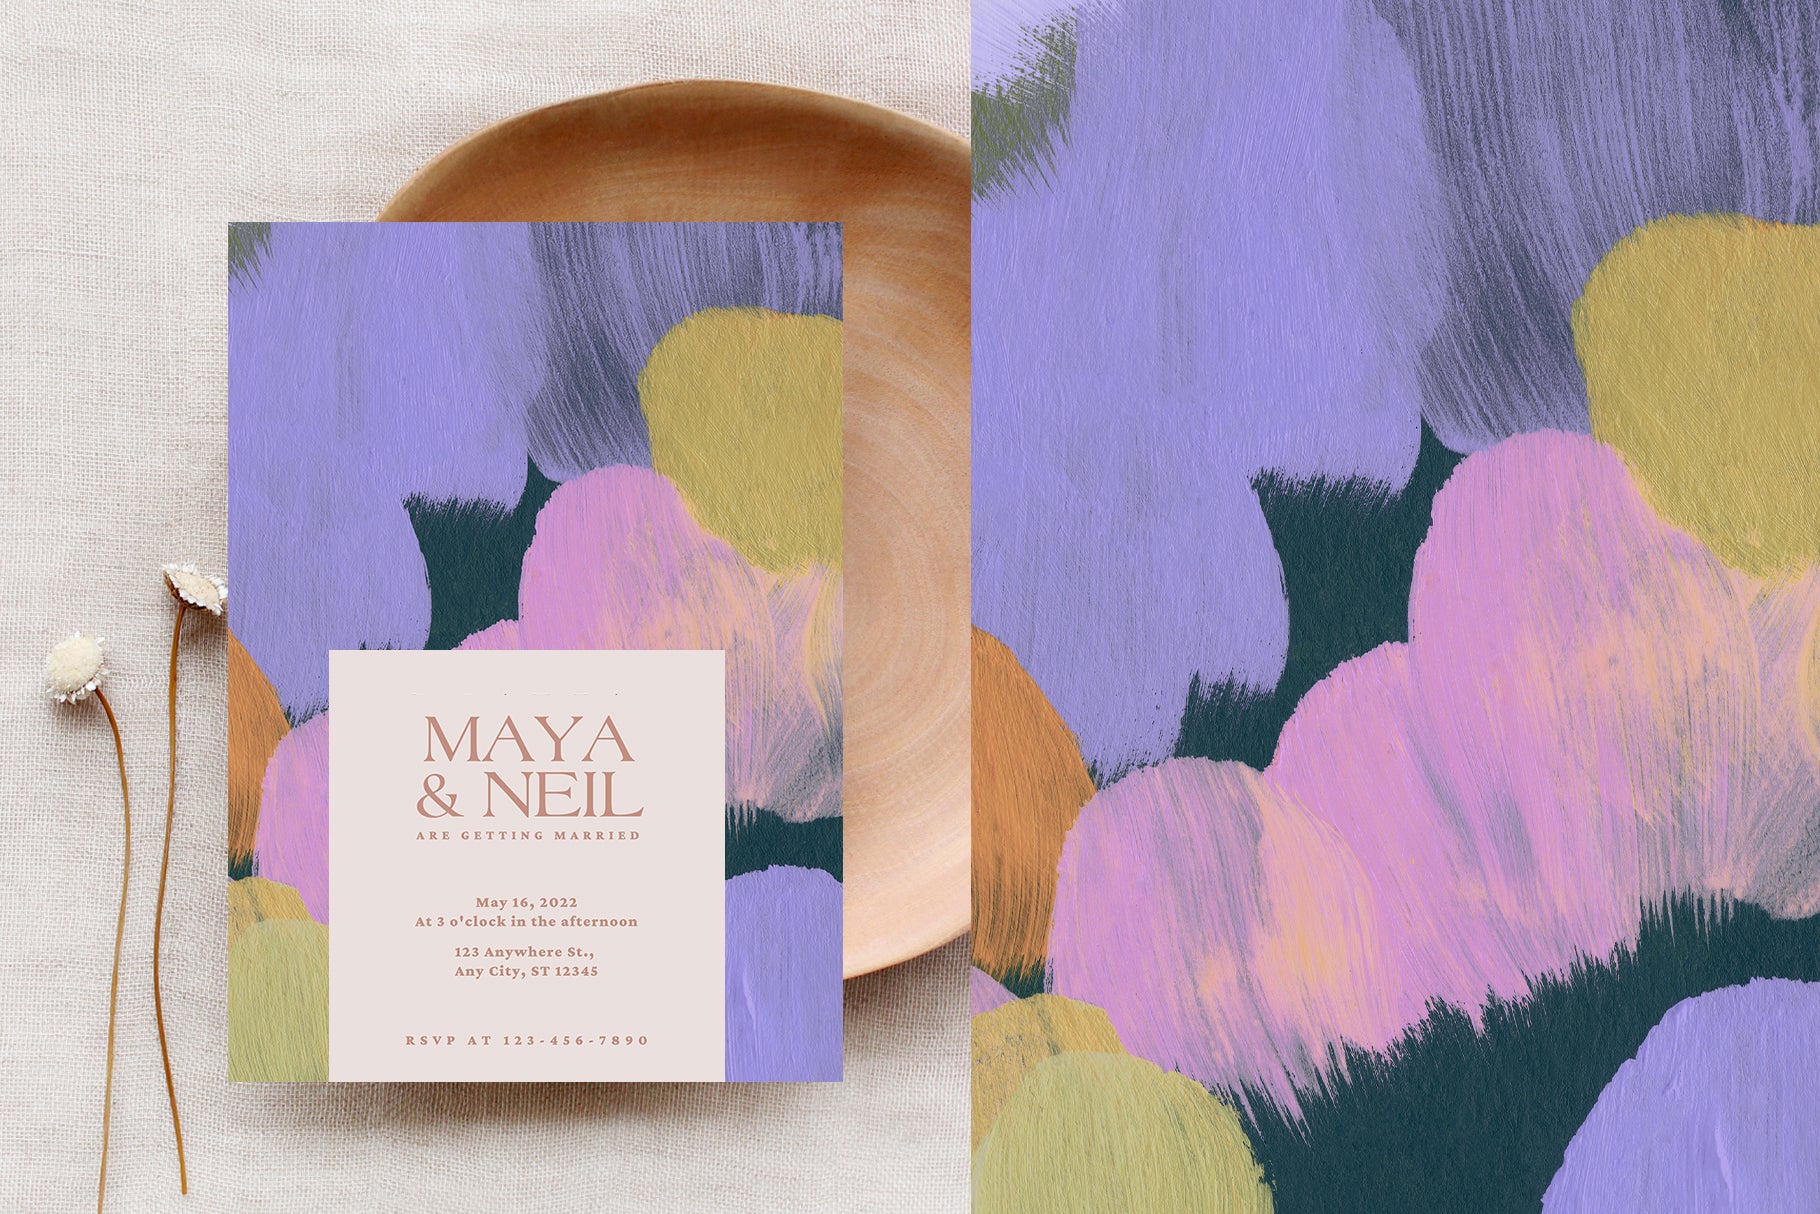 painted artistic background on top of wedding invitation design